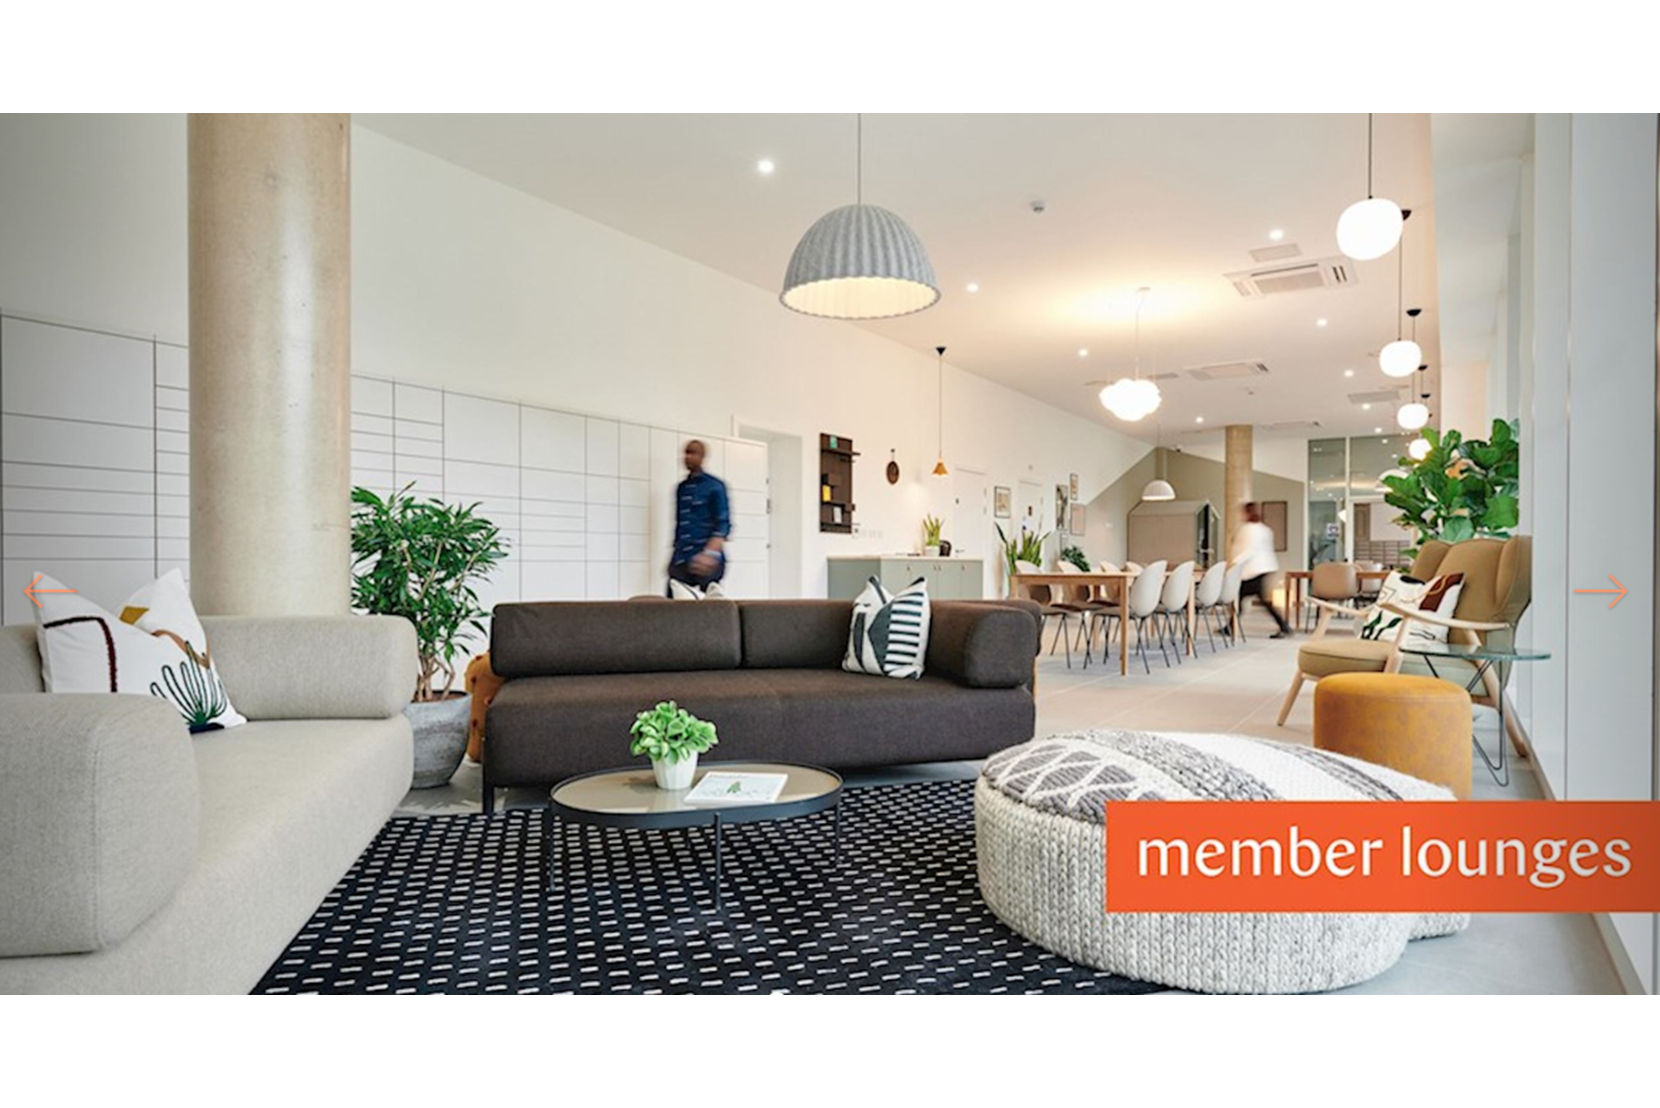 Apartment-APO-Group-Barking-Greater-London-Internal-Member-Lounges